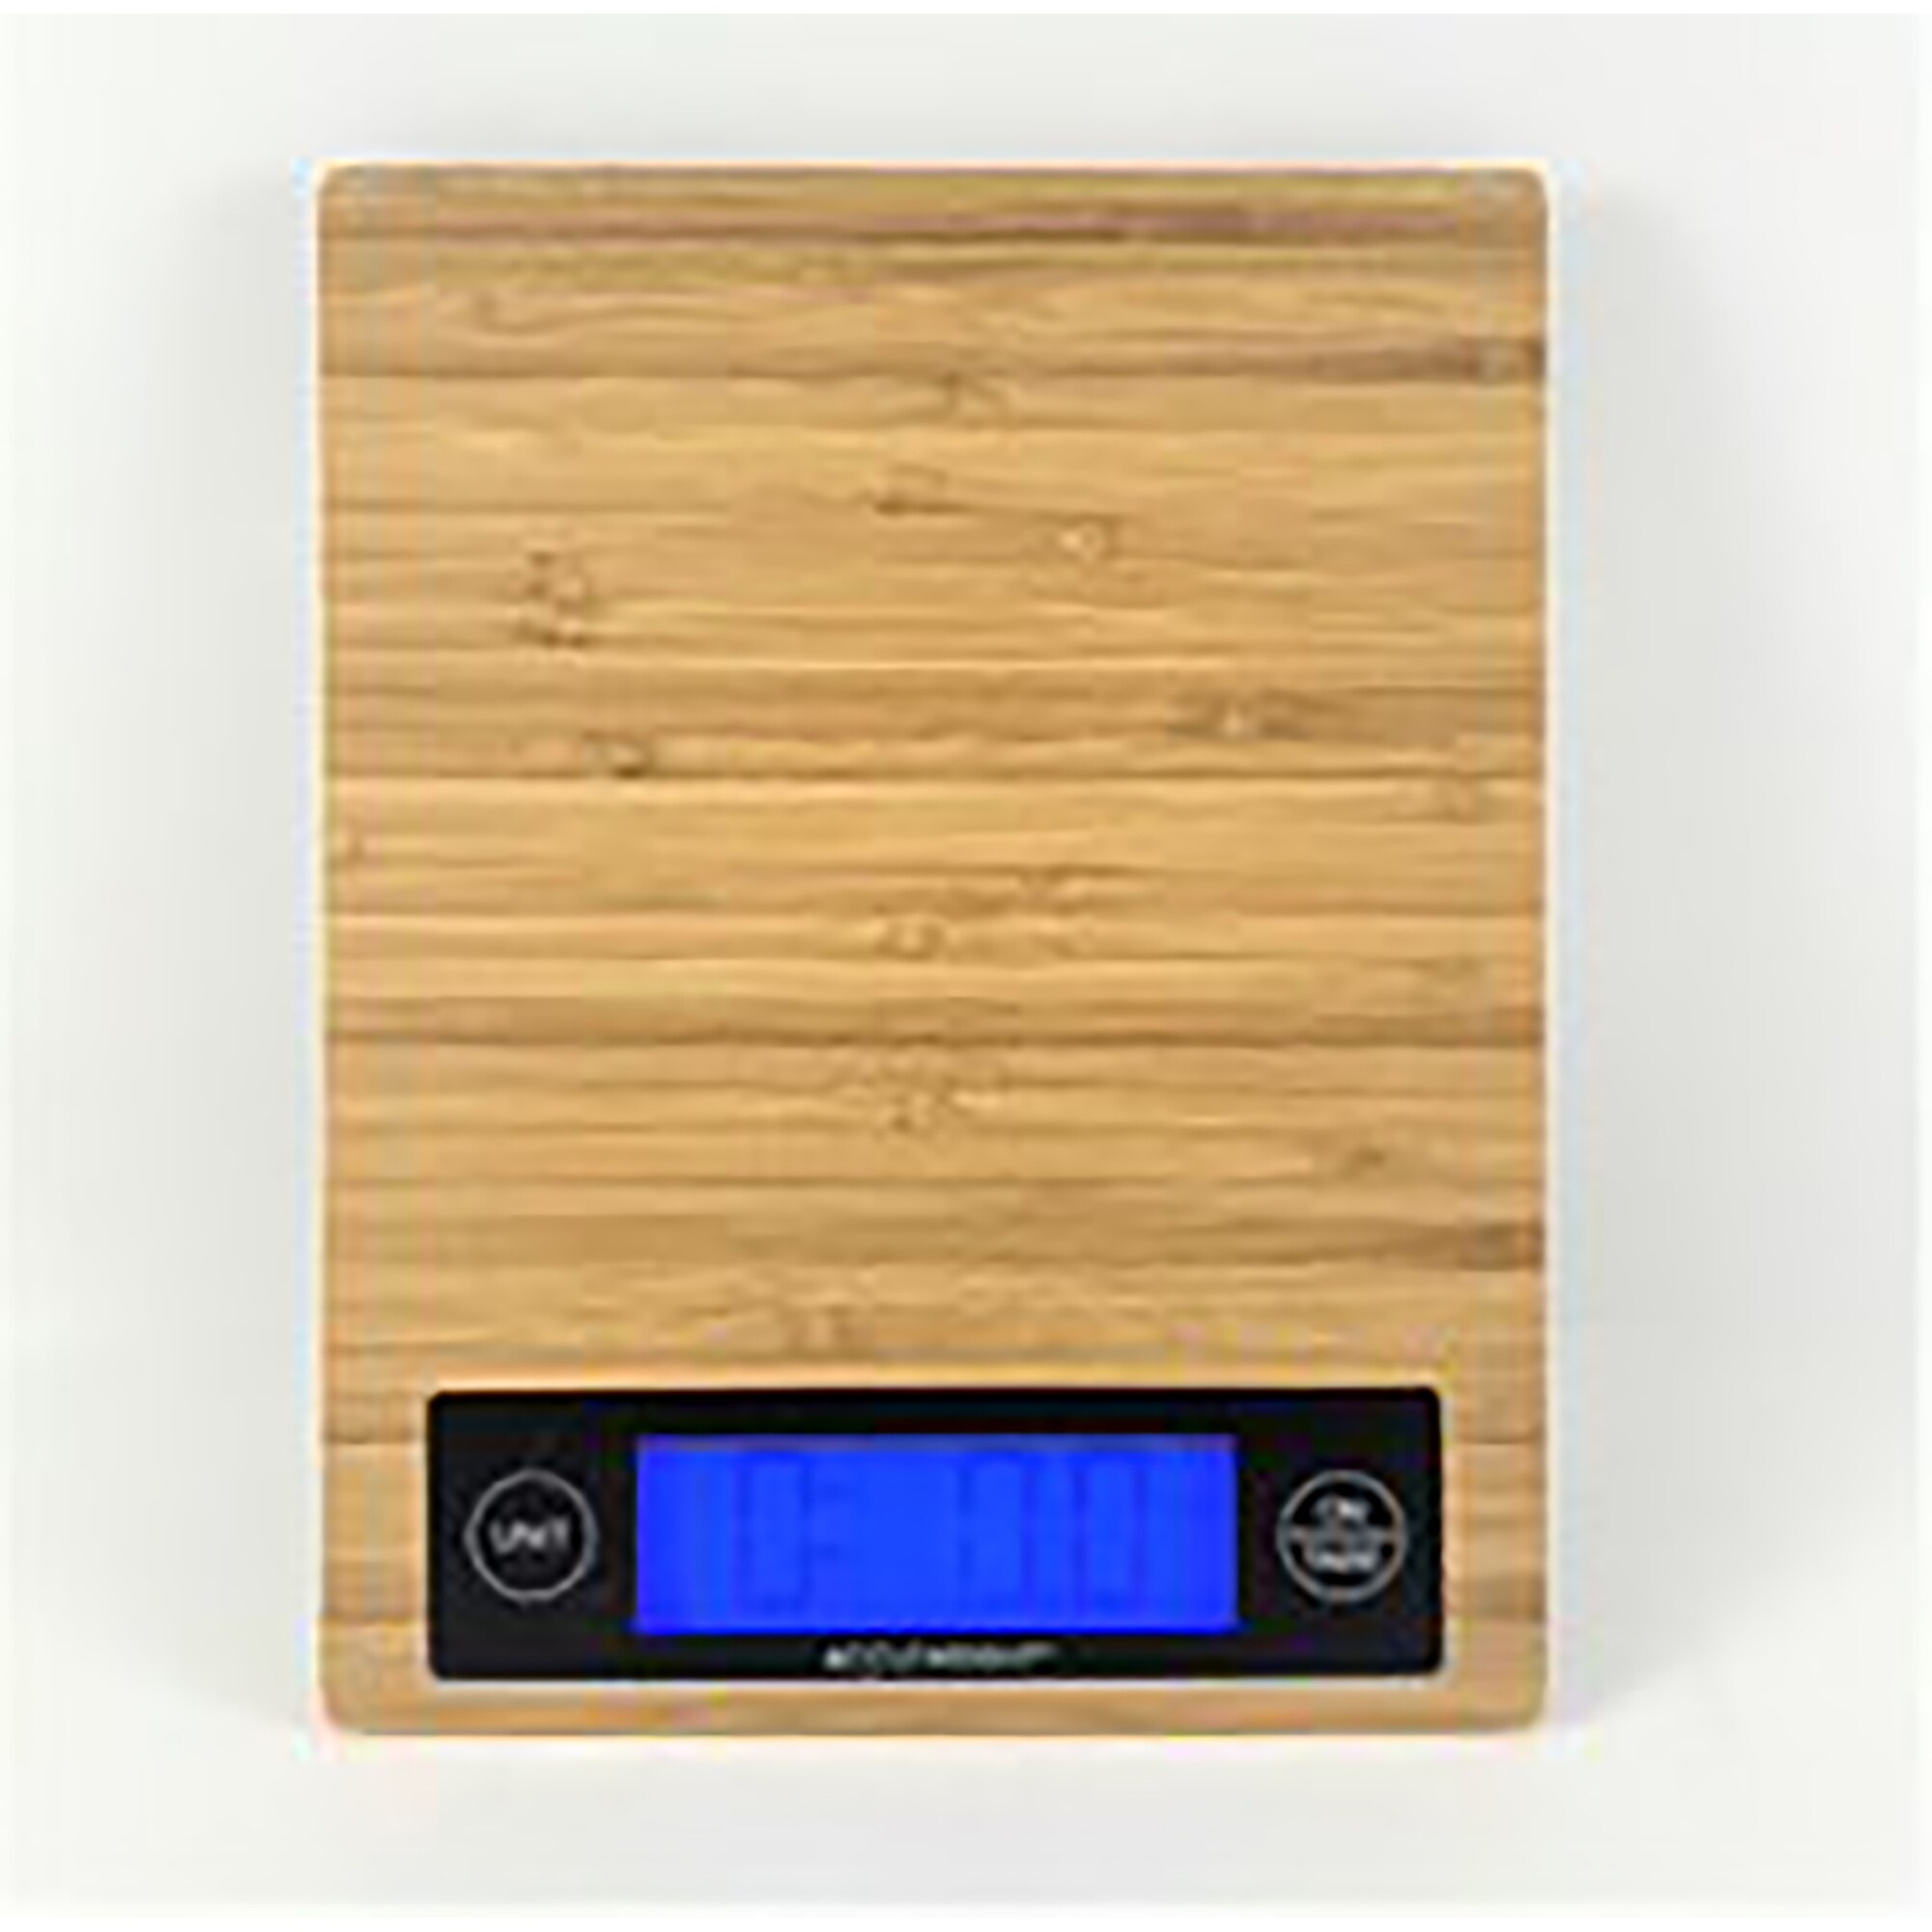 https://ak1.ostkcdn.com/images/products/is/images/direct/a18af82d81f04c1dc34a84f42e8501b2b24ff02e/AccuWeight-Platinum-Series---5-kg-Digital-Bamboo-Kitchen-Scale.jpg